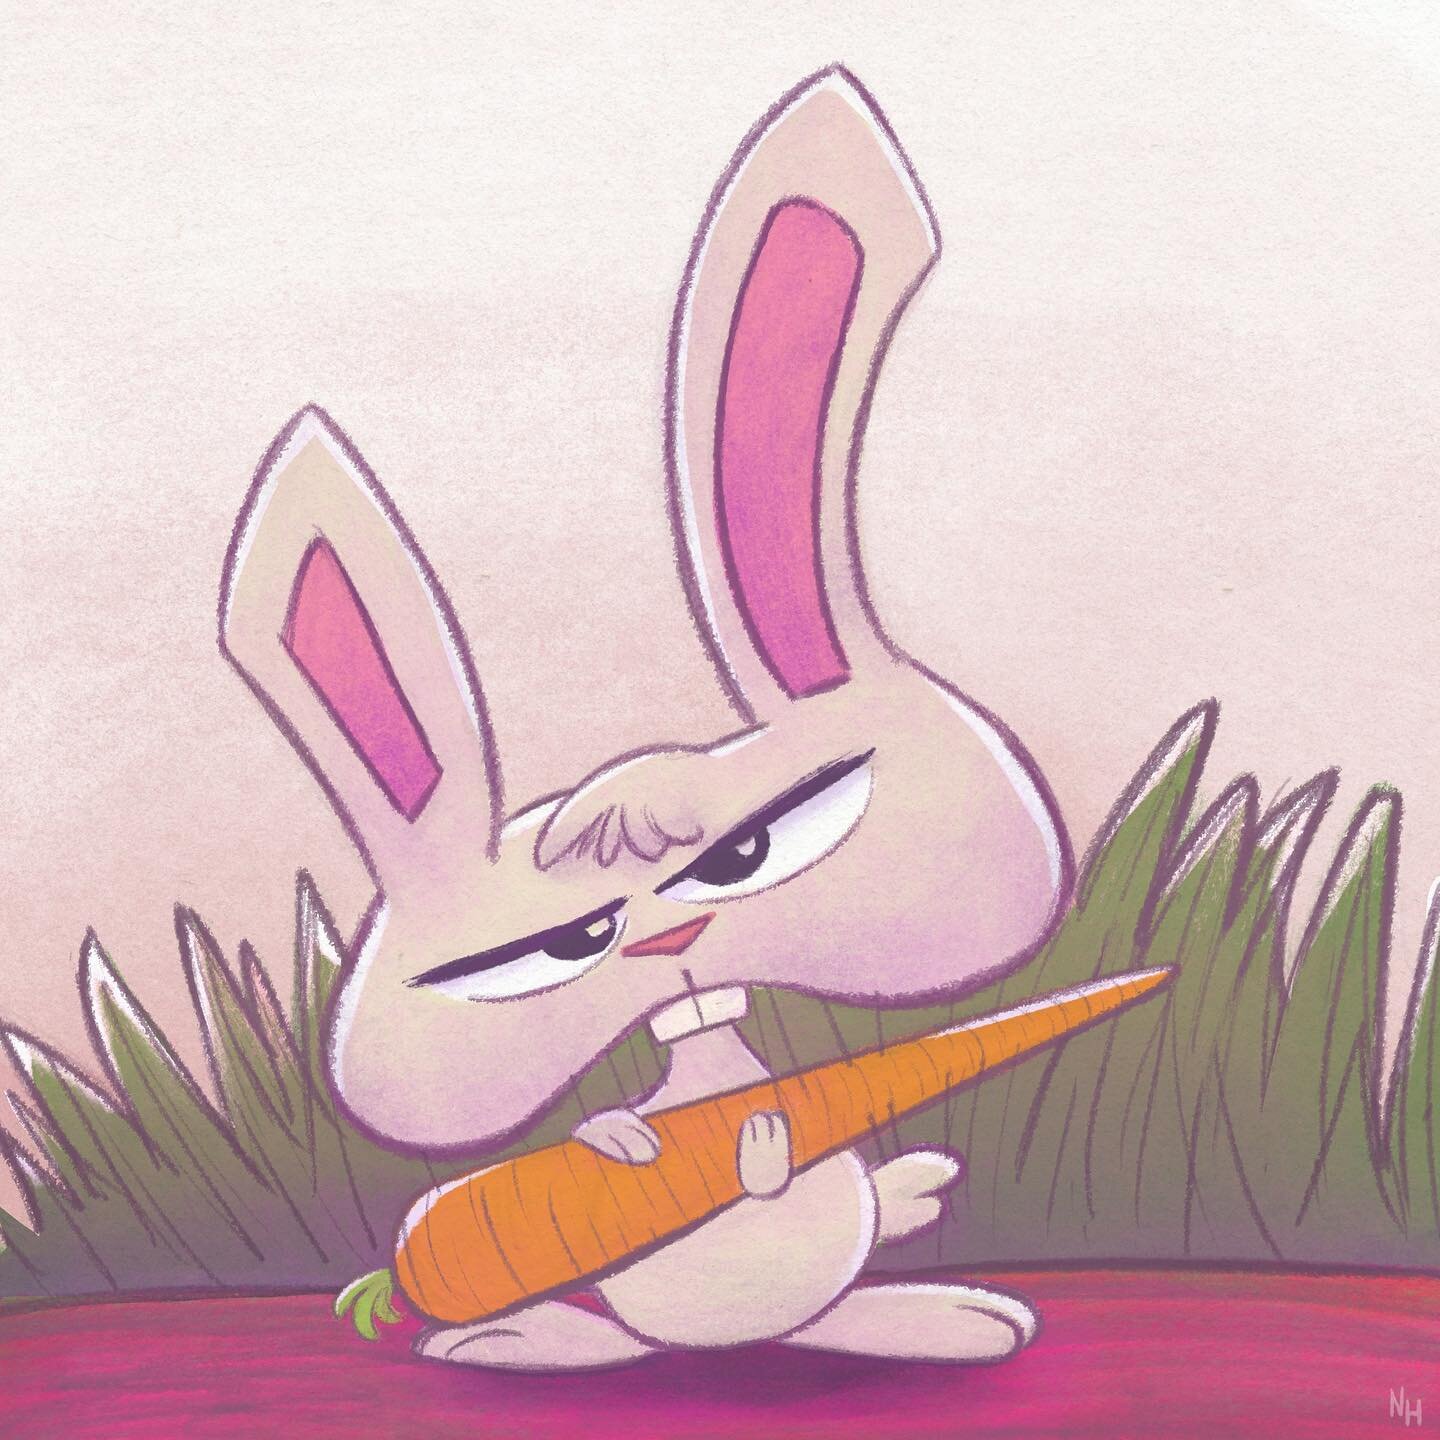 Don&rsquo;t touch my carrot... 
.
.
.
.
.
.
.
.
.
.
.
.
.
.
.

#artist #sketchbook #sketchbooks #sketch #sketching #draw #drawing #drawings  #doodle #doodles #love #digitalart  #timelapse #sketchdaily #sketchdailies #dailydrawing #kidillustration #sk